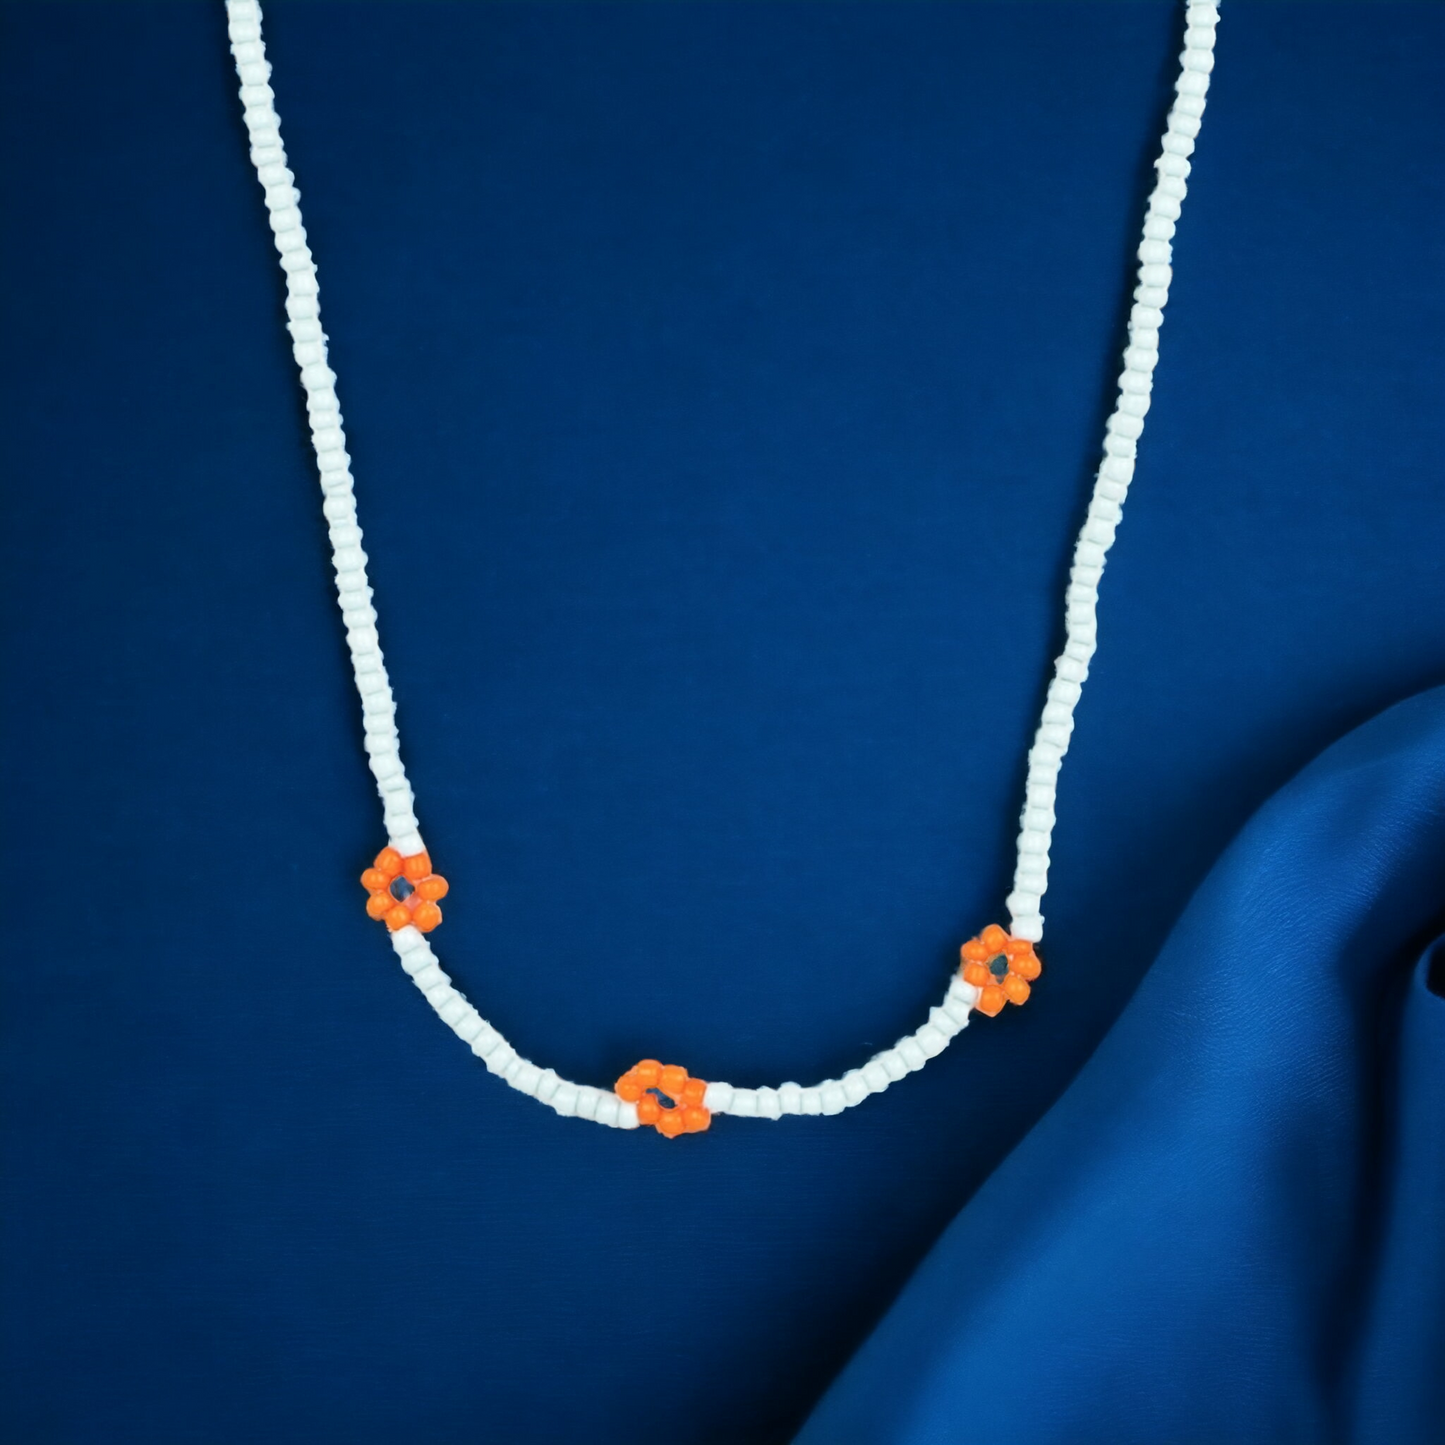 Bewitching Beading - Orange Daisy Necklace - Bling by Danielle Baker